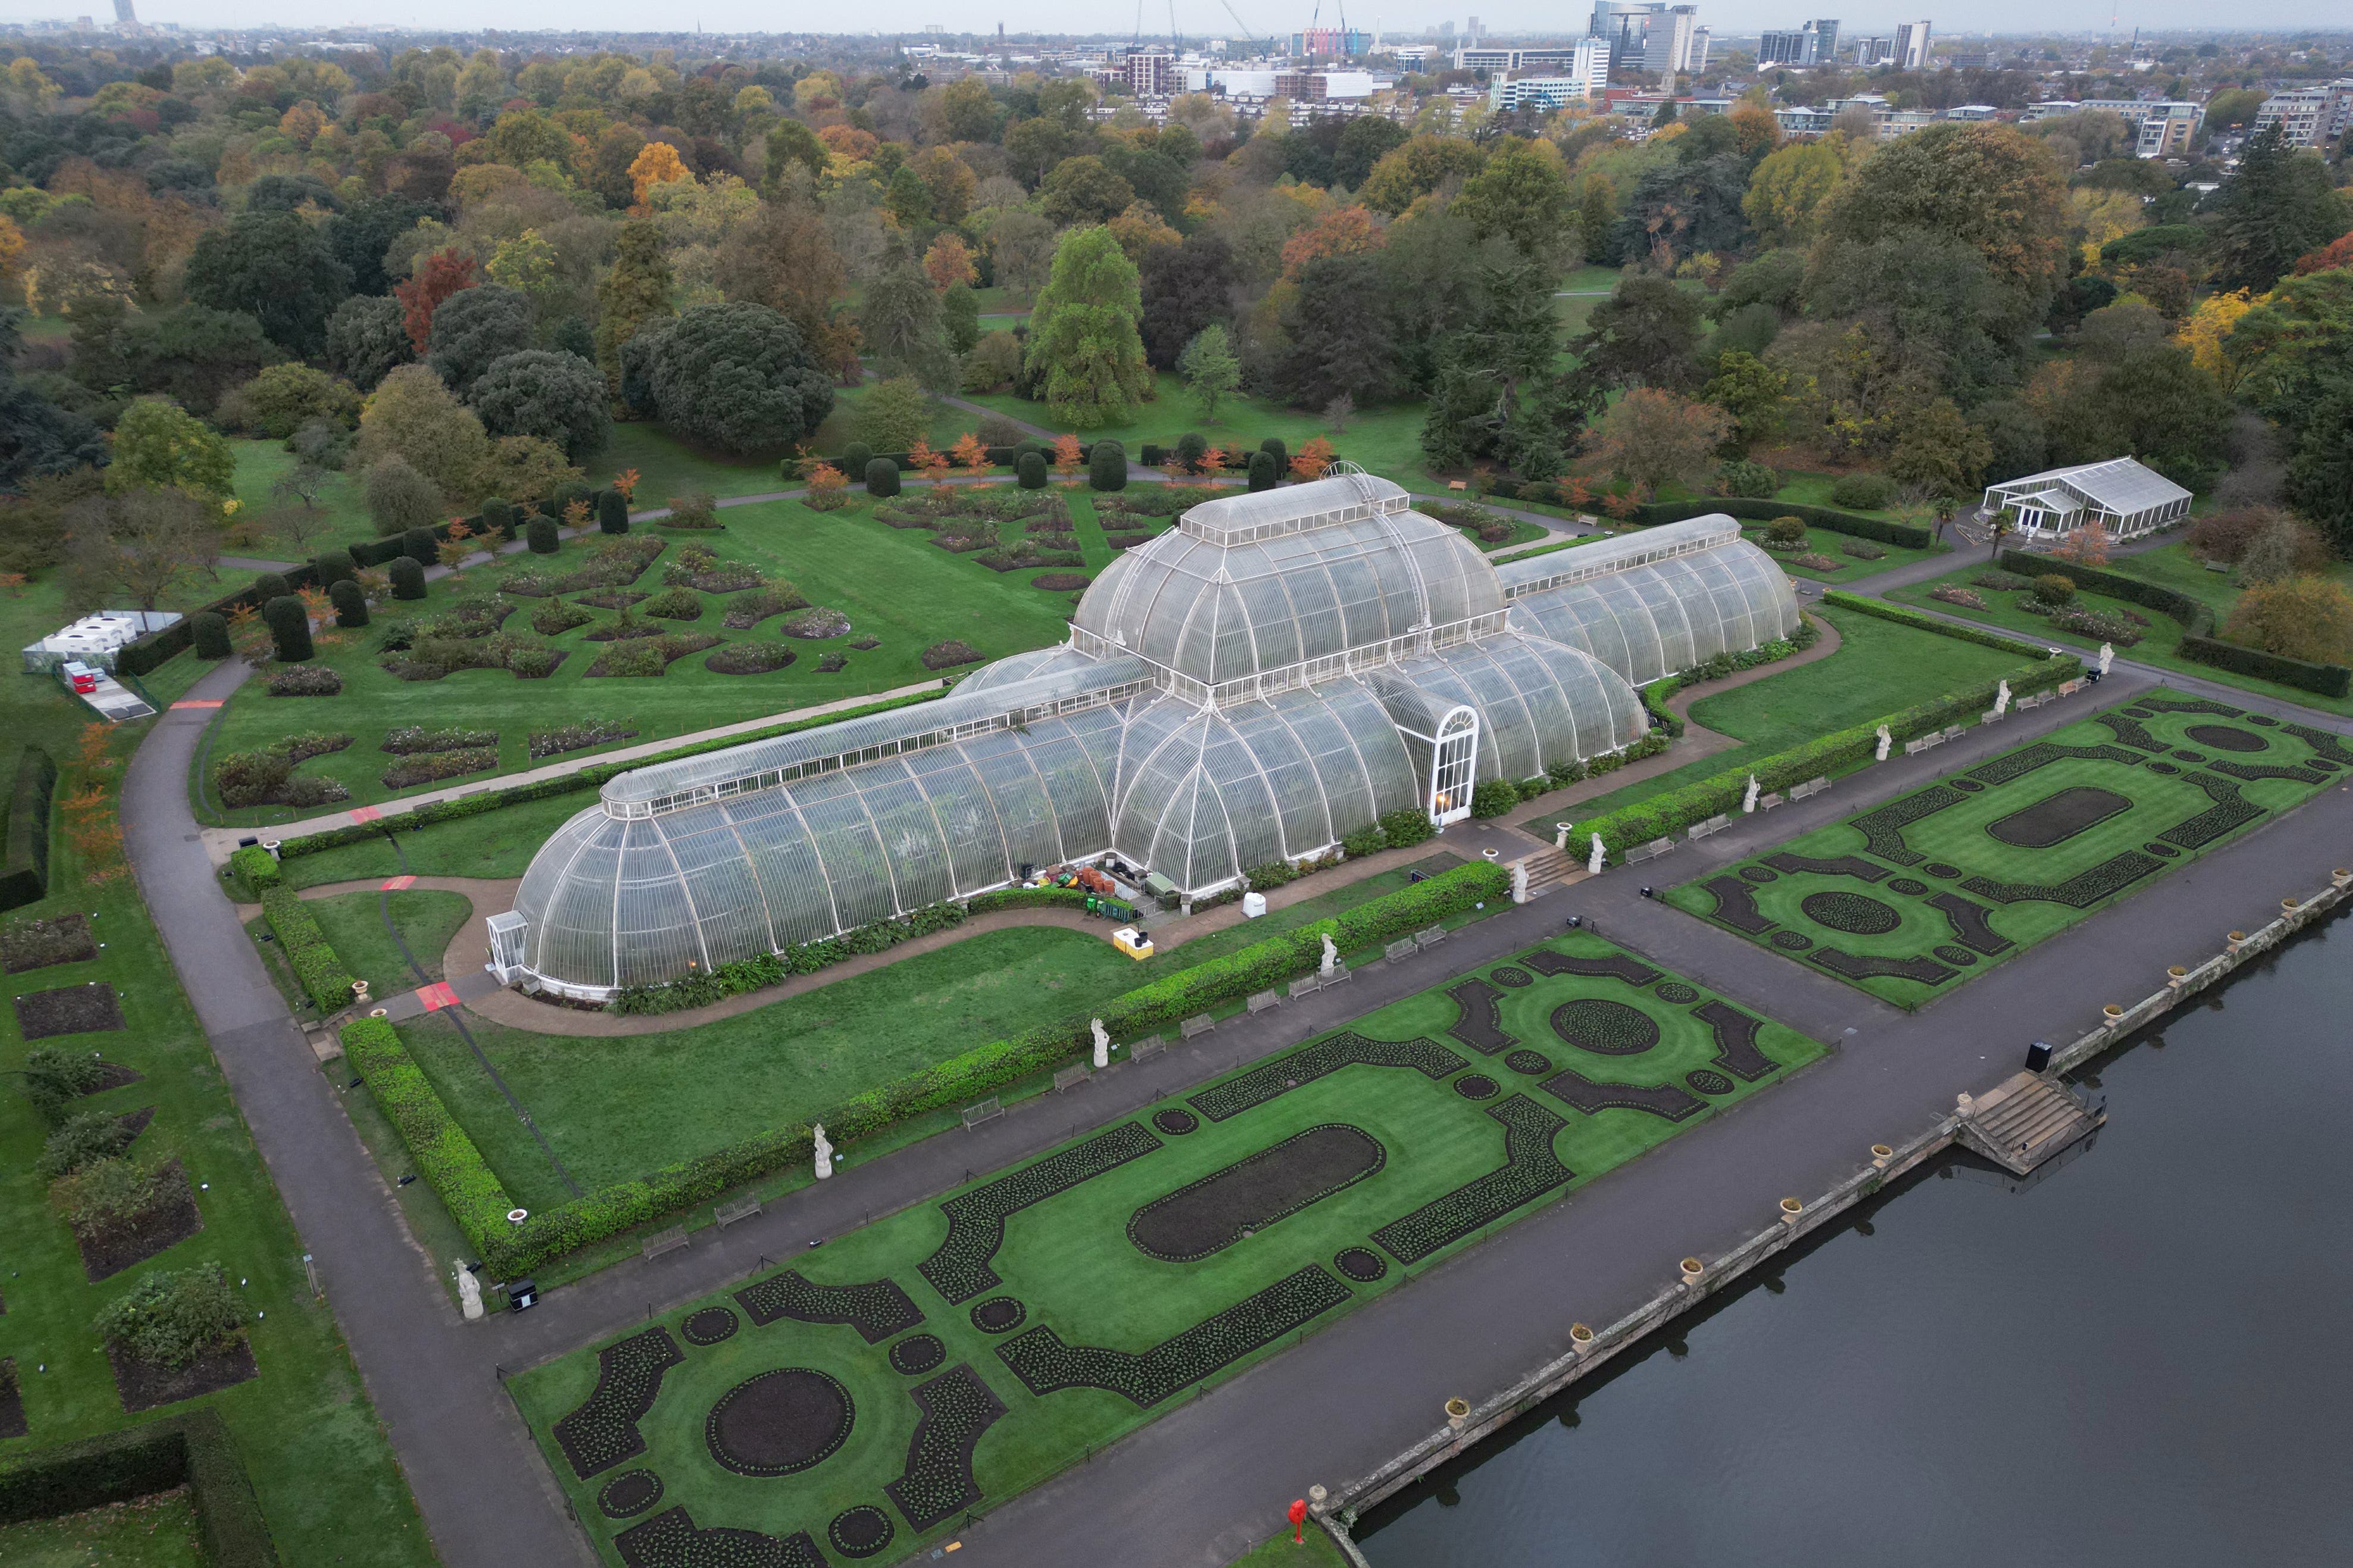 Kew Gardens was forced to shut early due to the weather